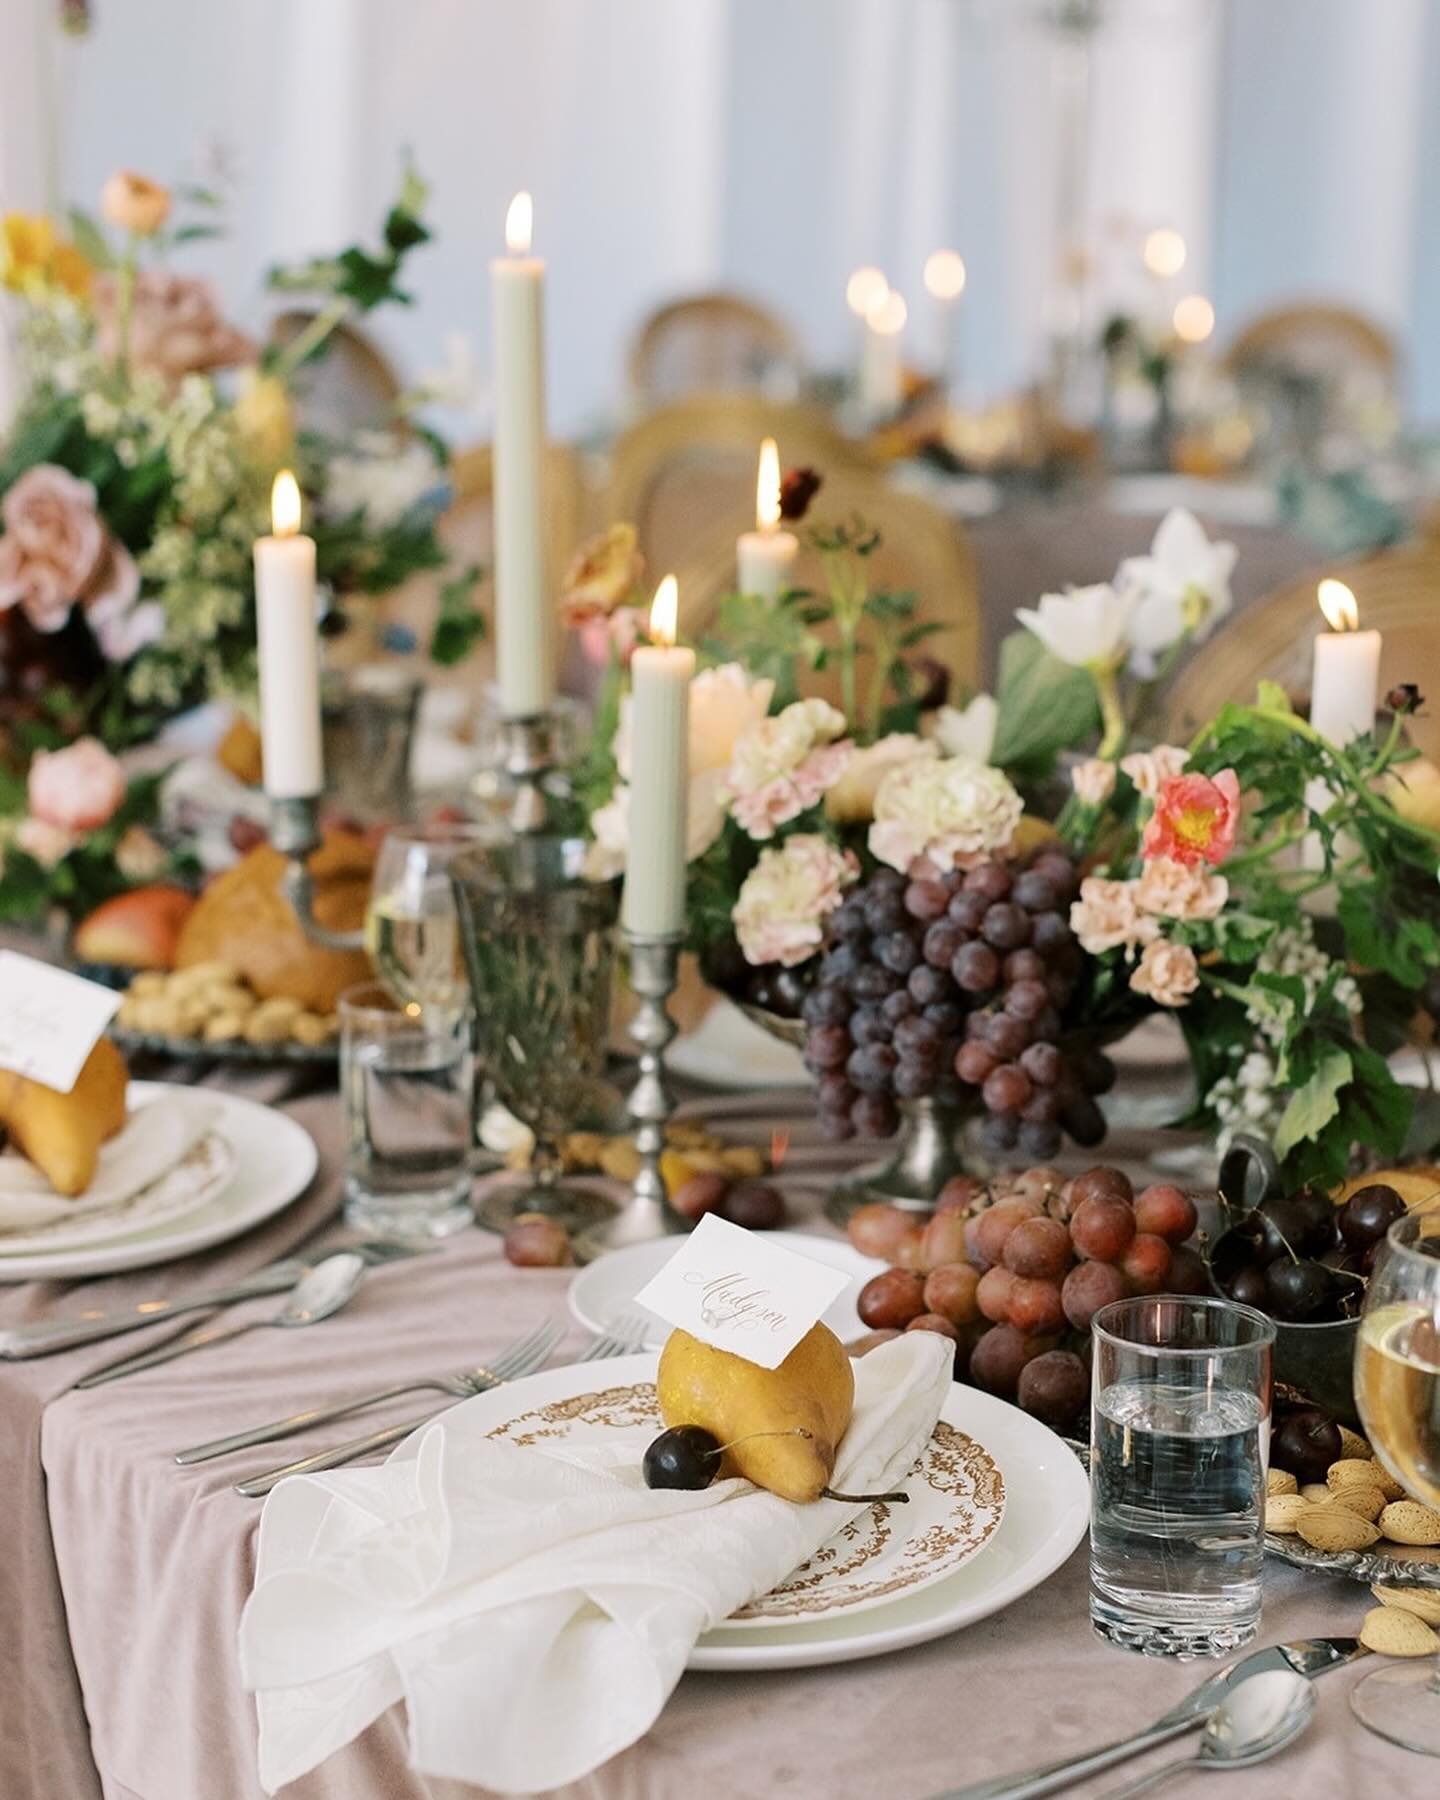 Spending time on a wedding day capturing details is one of my favorite things to do. Each moment adds up to paint a picture of your day. So much planning goes into these details, and I want none of them to go unnoticed. Tablescapes are especially fun